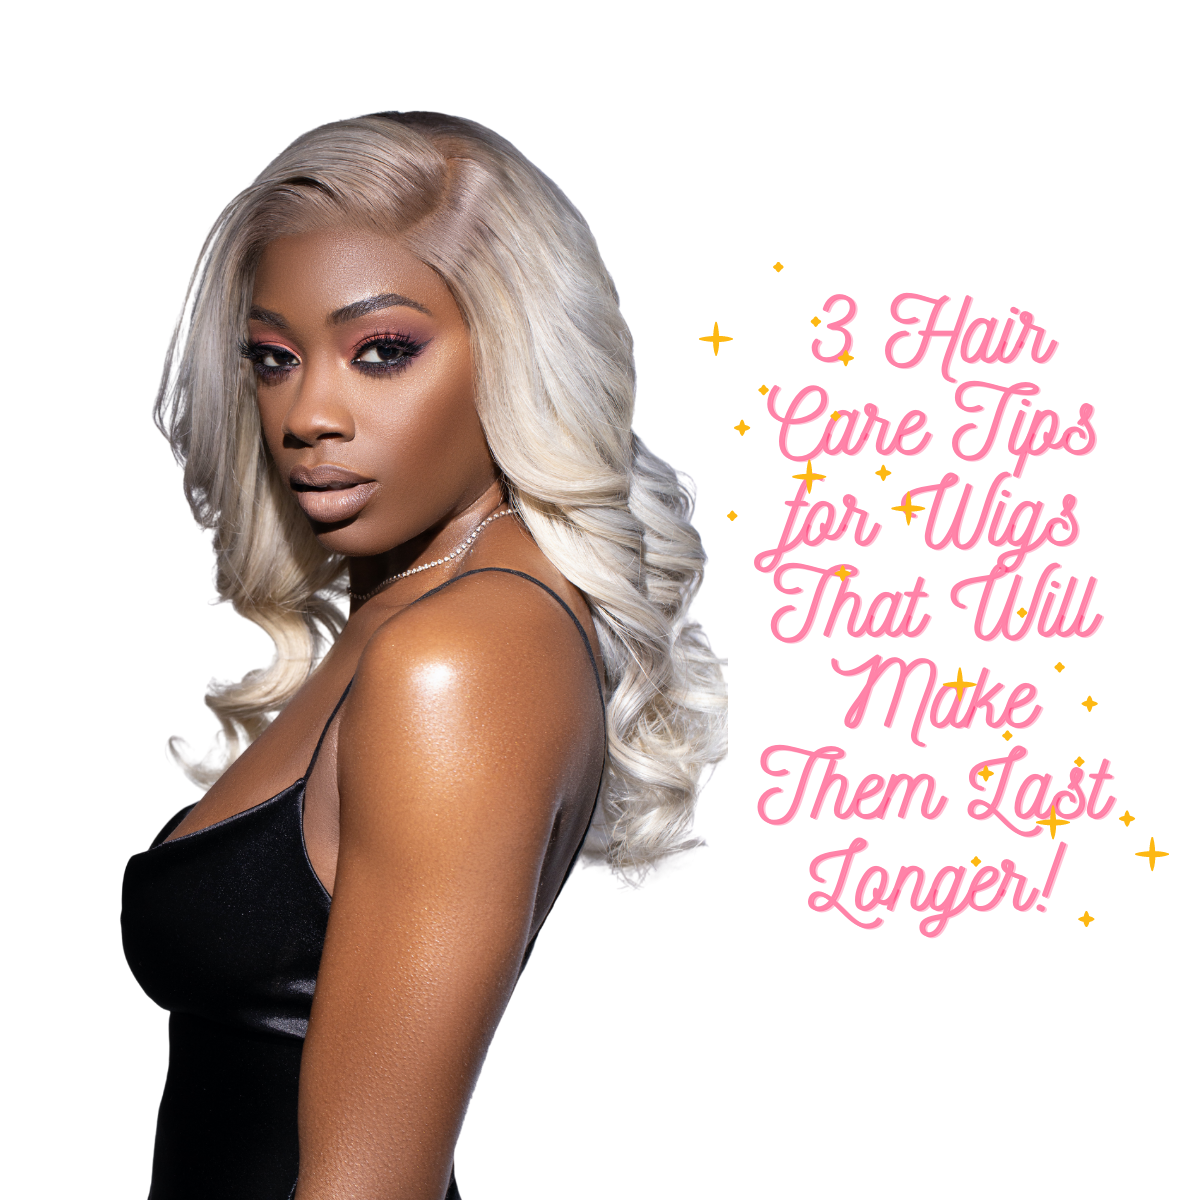 3 Hair Care Tips for Wigs That Will Make Them Last Longer!